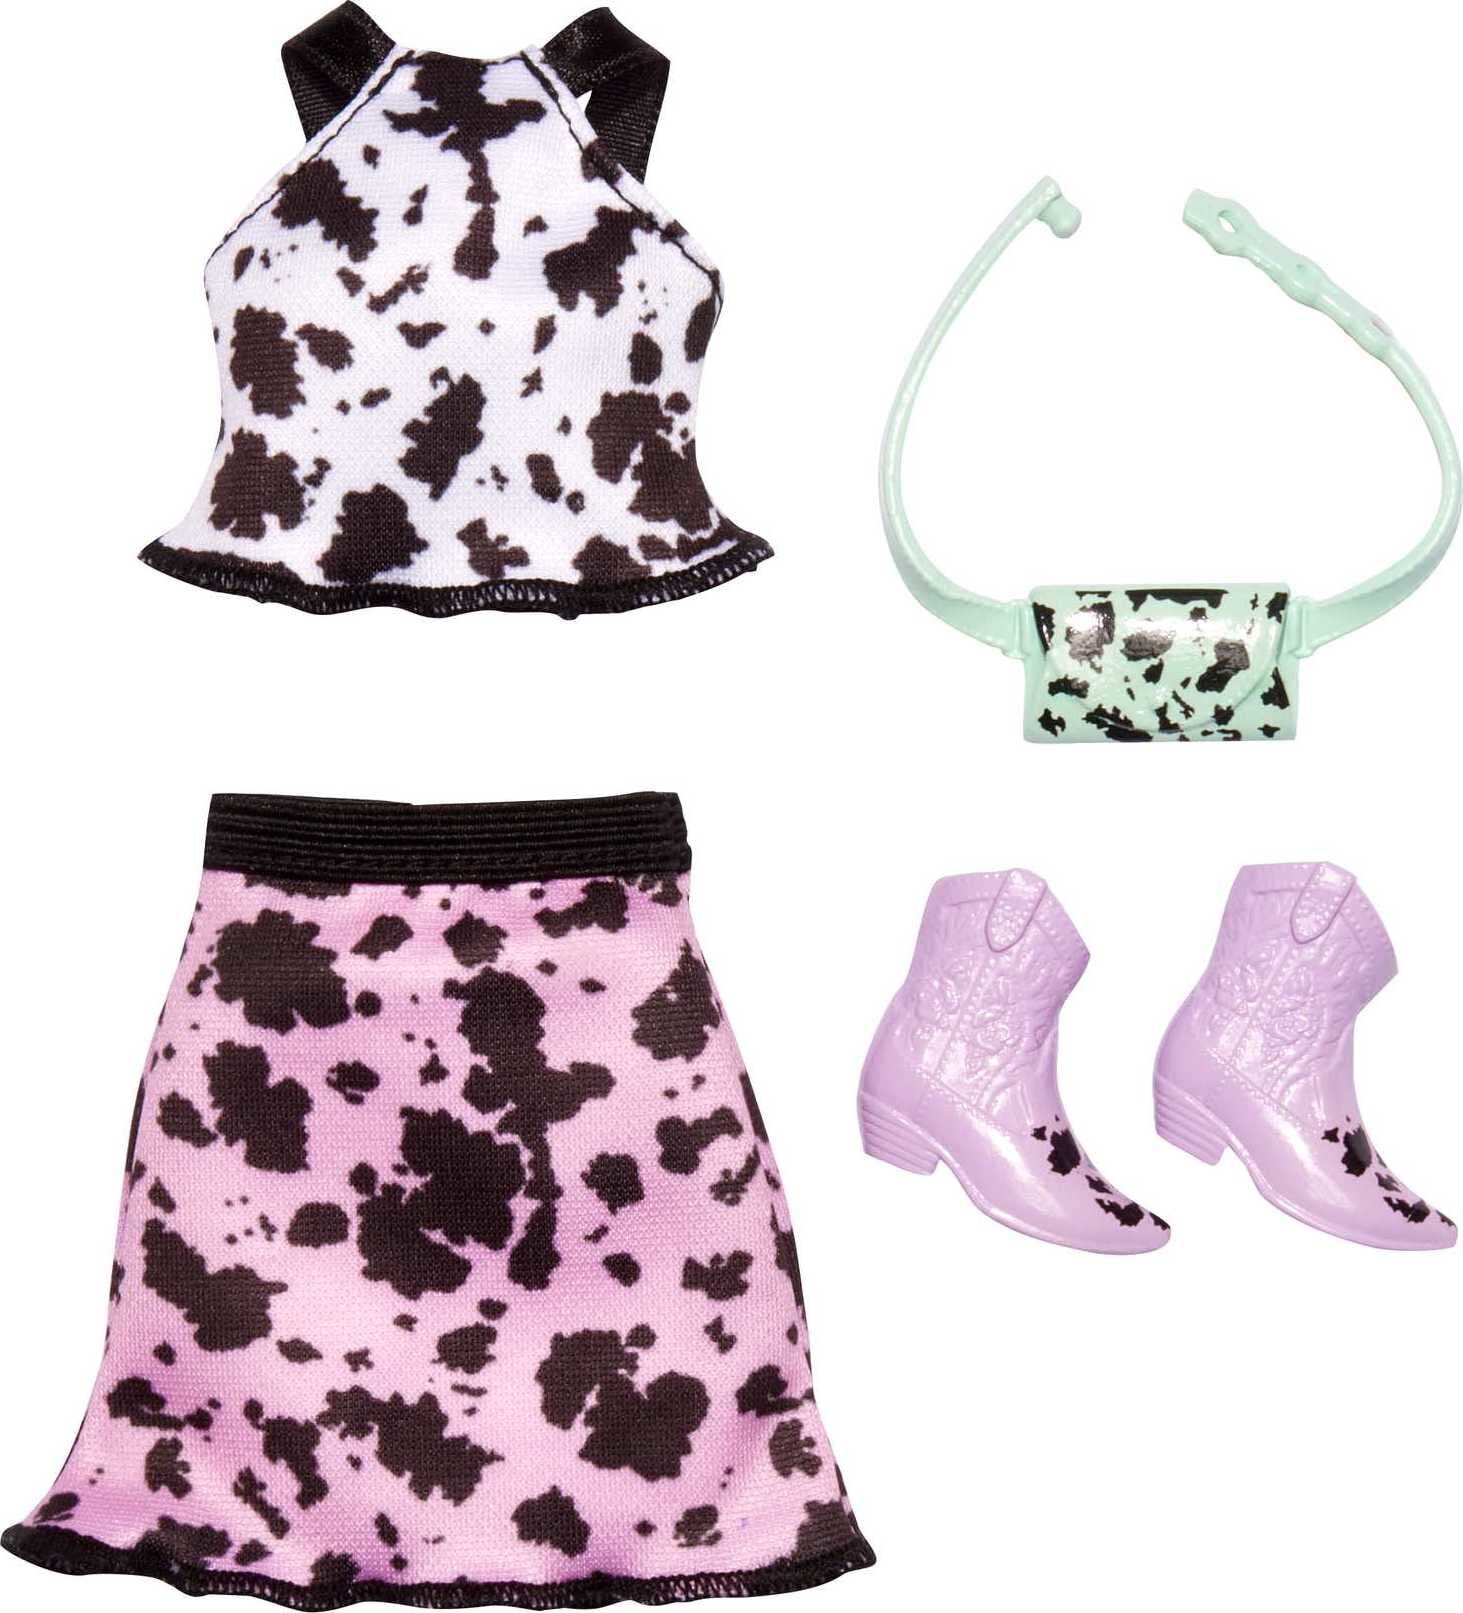 Barbie Fashion Pack of Doll Clothes, Complete Look Set with Cow-Print Top and Skirt, Plus Accessories